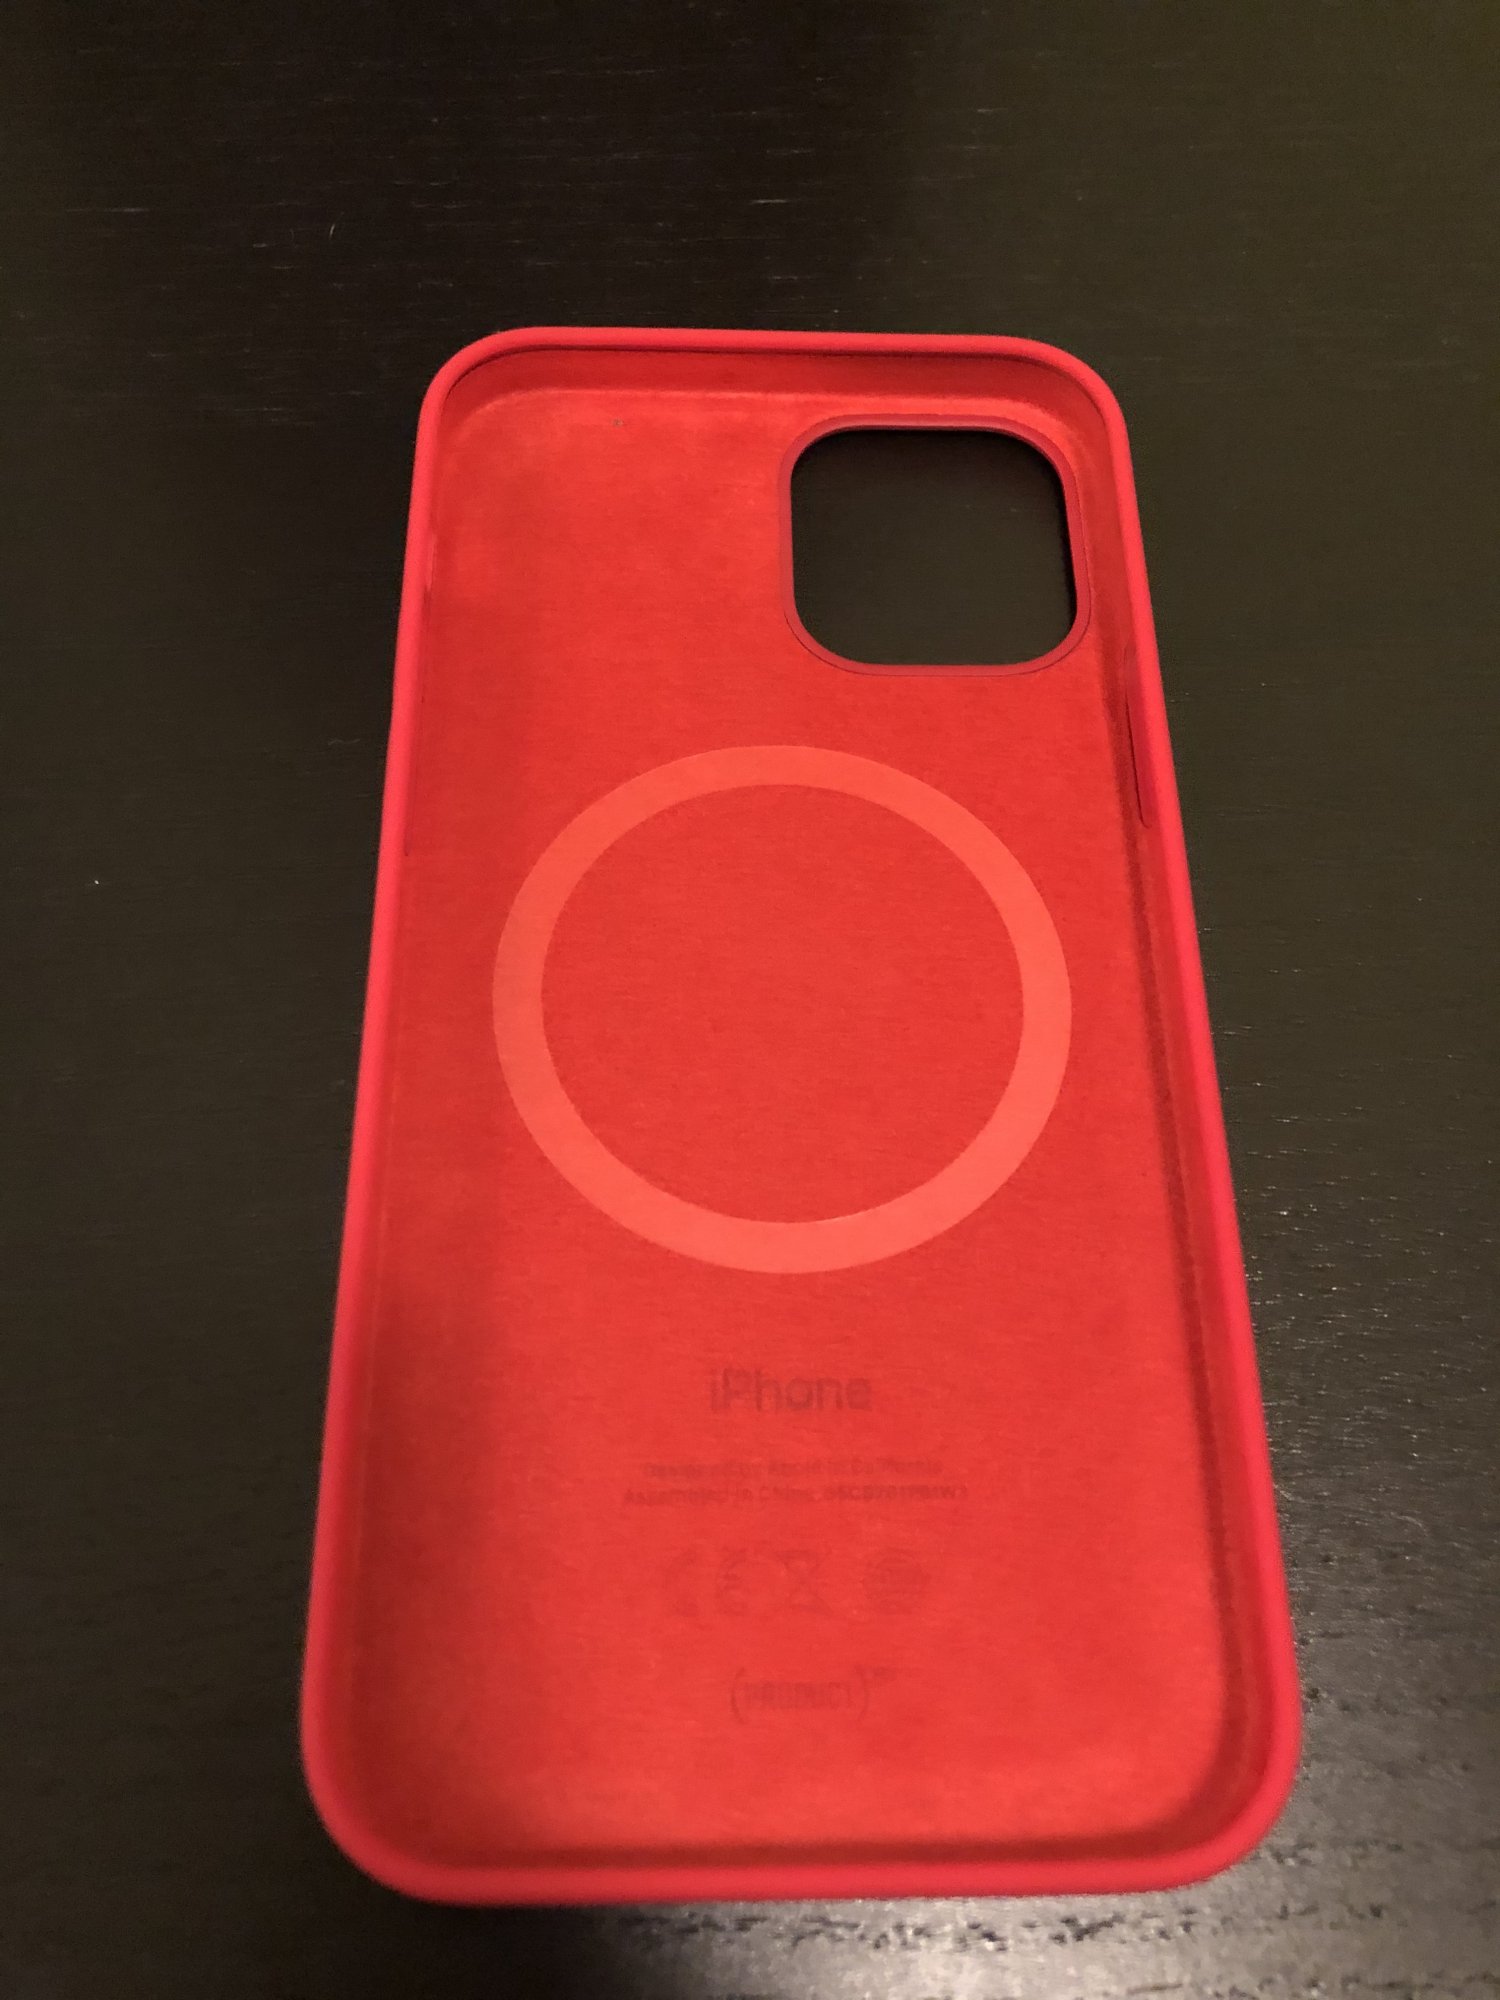 Carcasa Silicona iPhone SE Apple (PRODUCT) RED